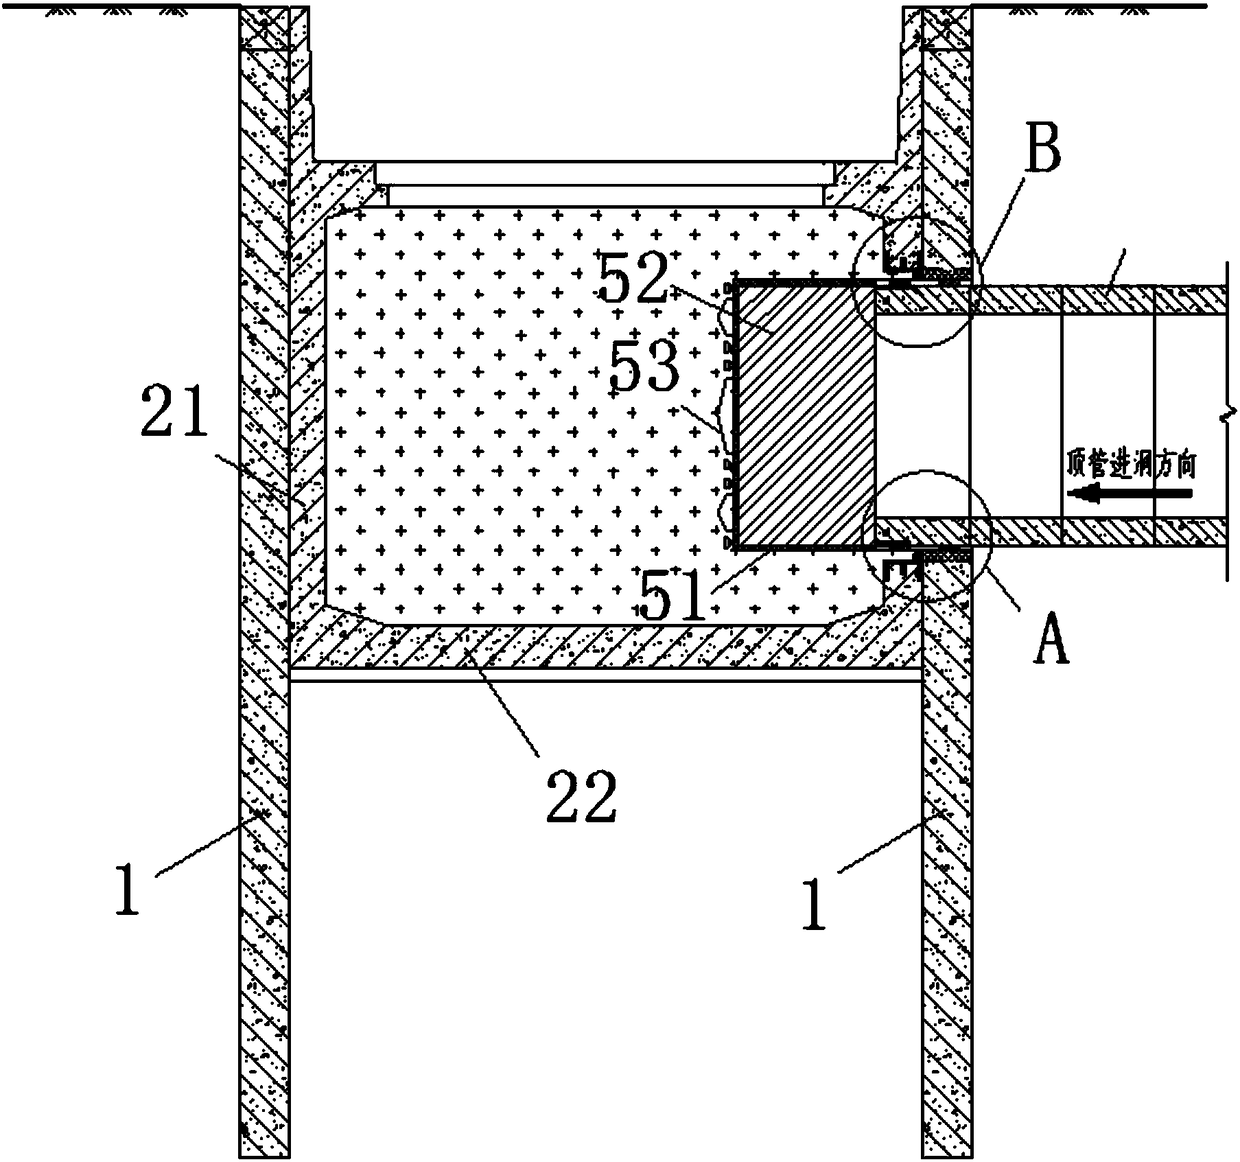 Construction method of pipe jacking tooling in foam soil without foundation reinforcement outside the pit